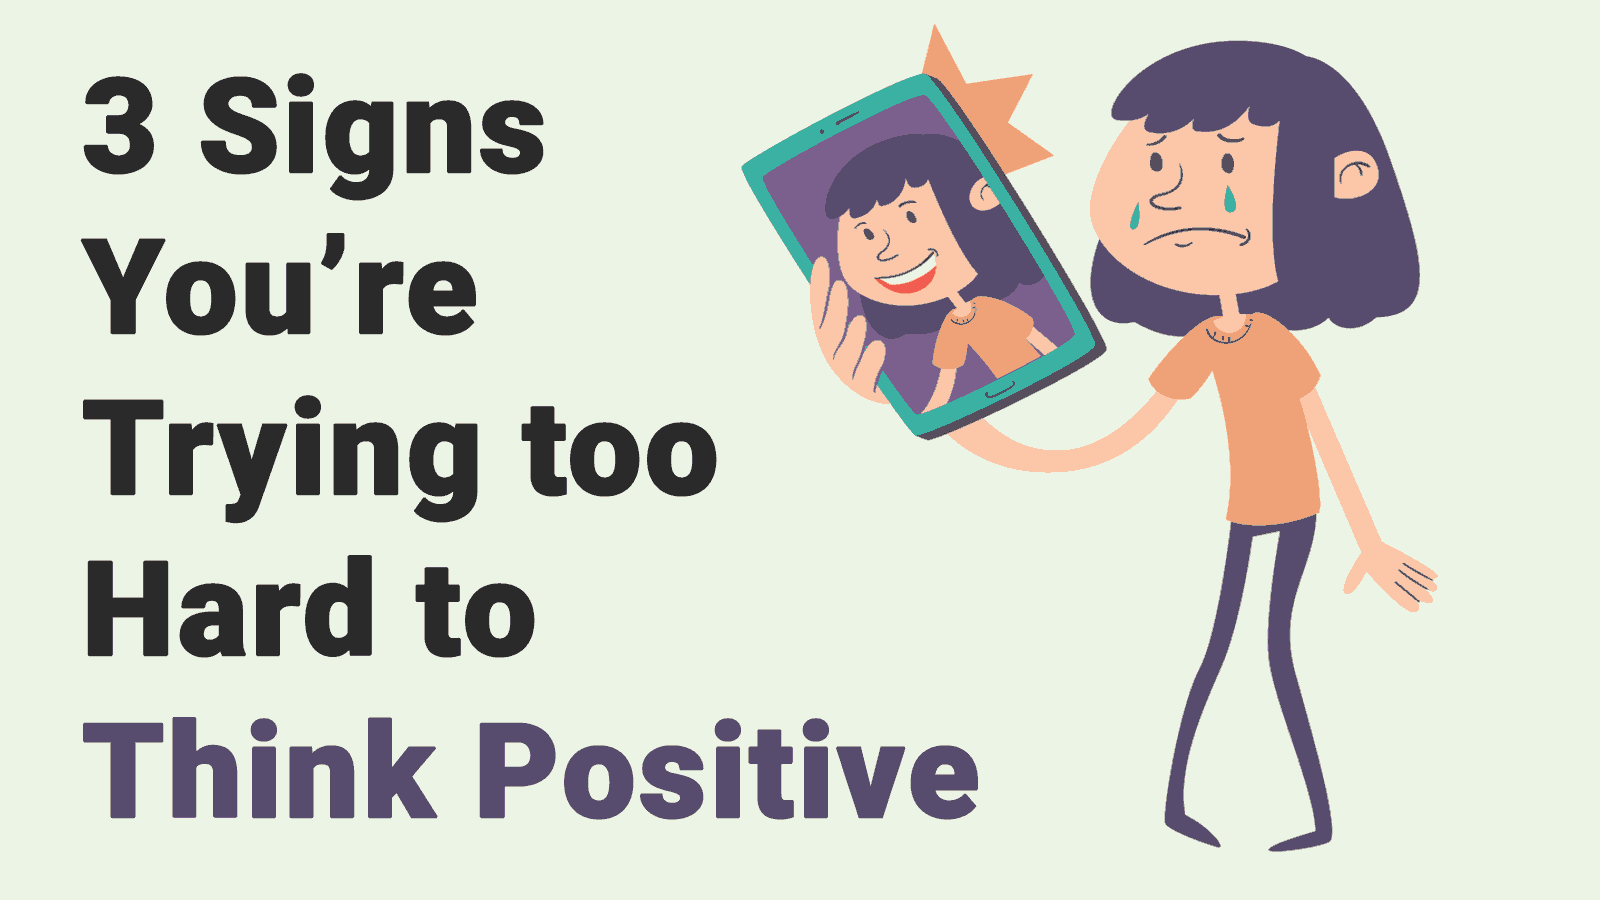 3 Signs You’re Trying too Hard to Think Positive